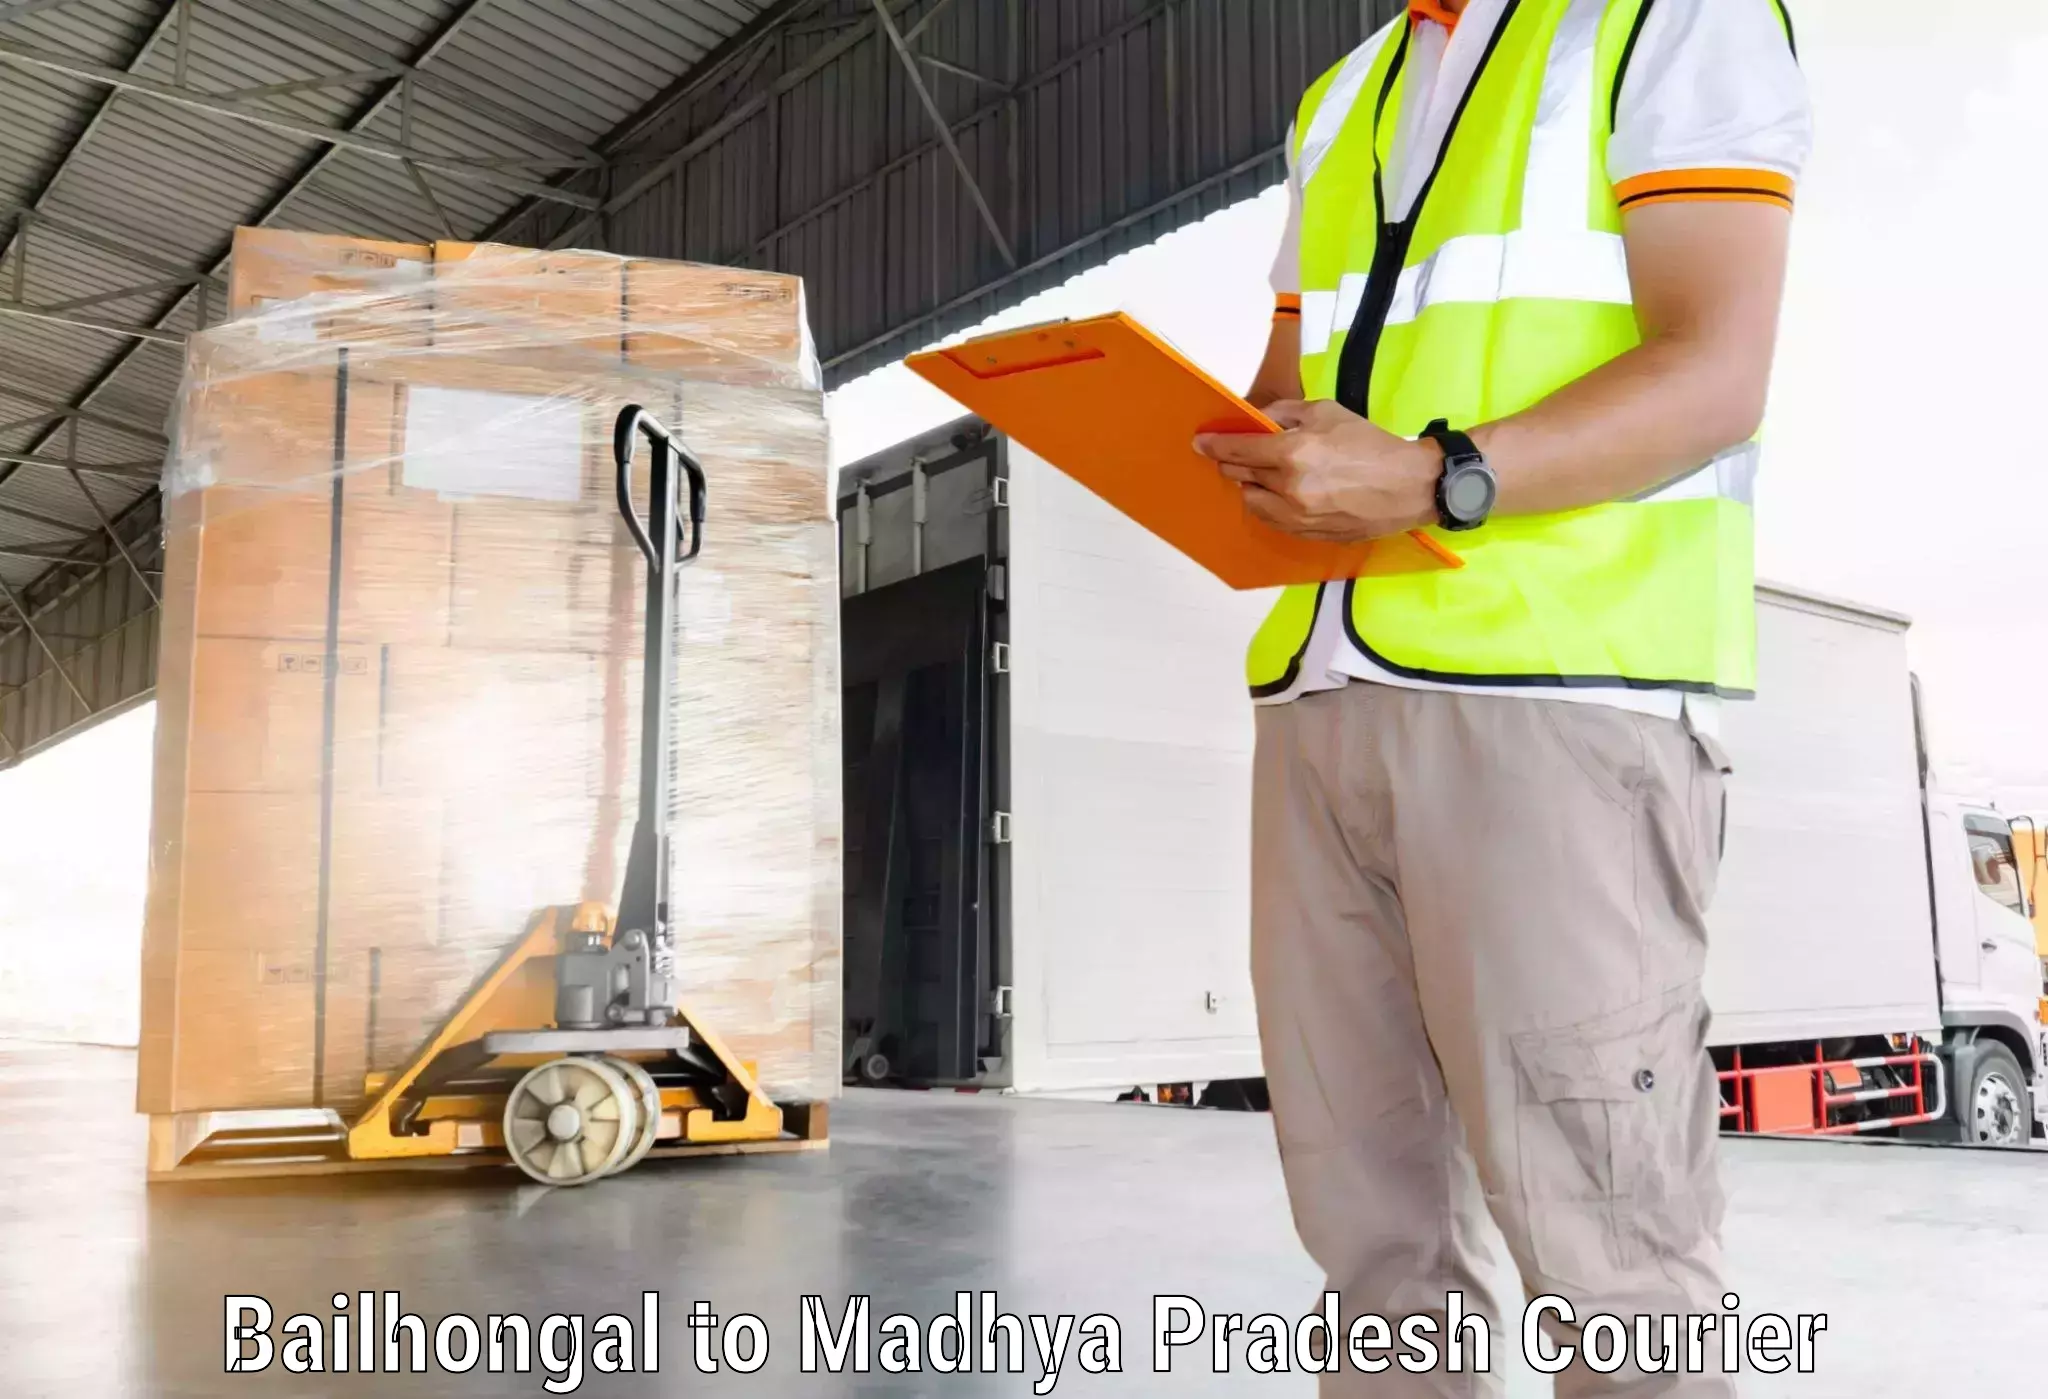 Efficient order fulfillment in Bailhongal to Shahgarh